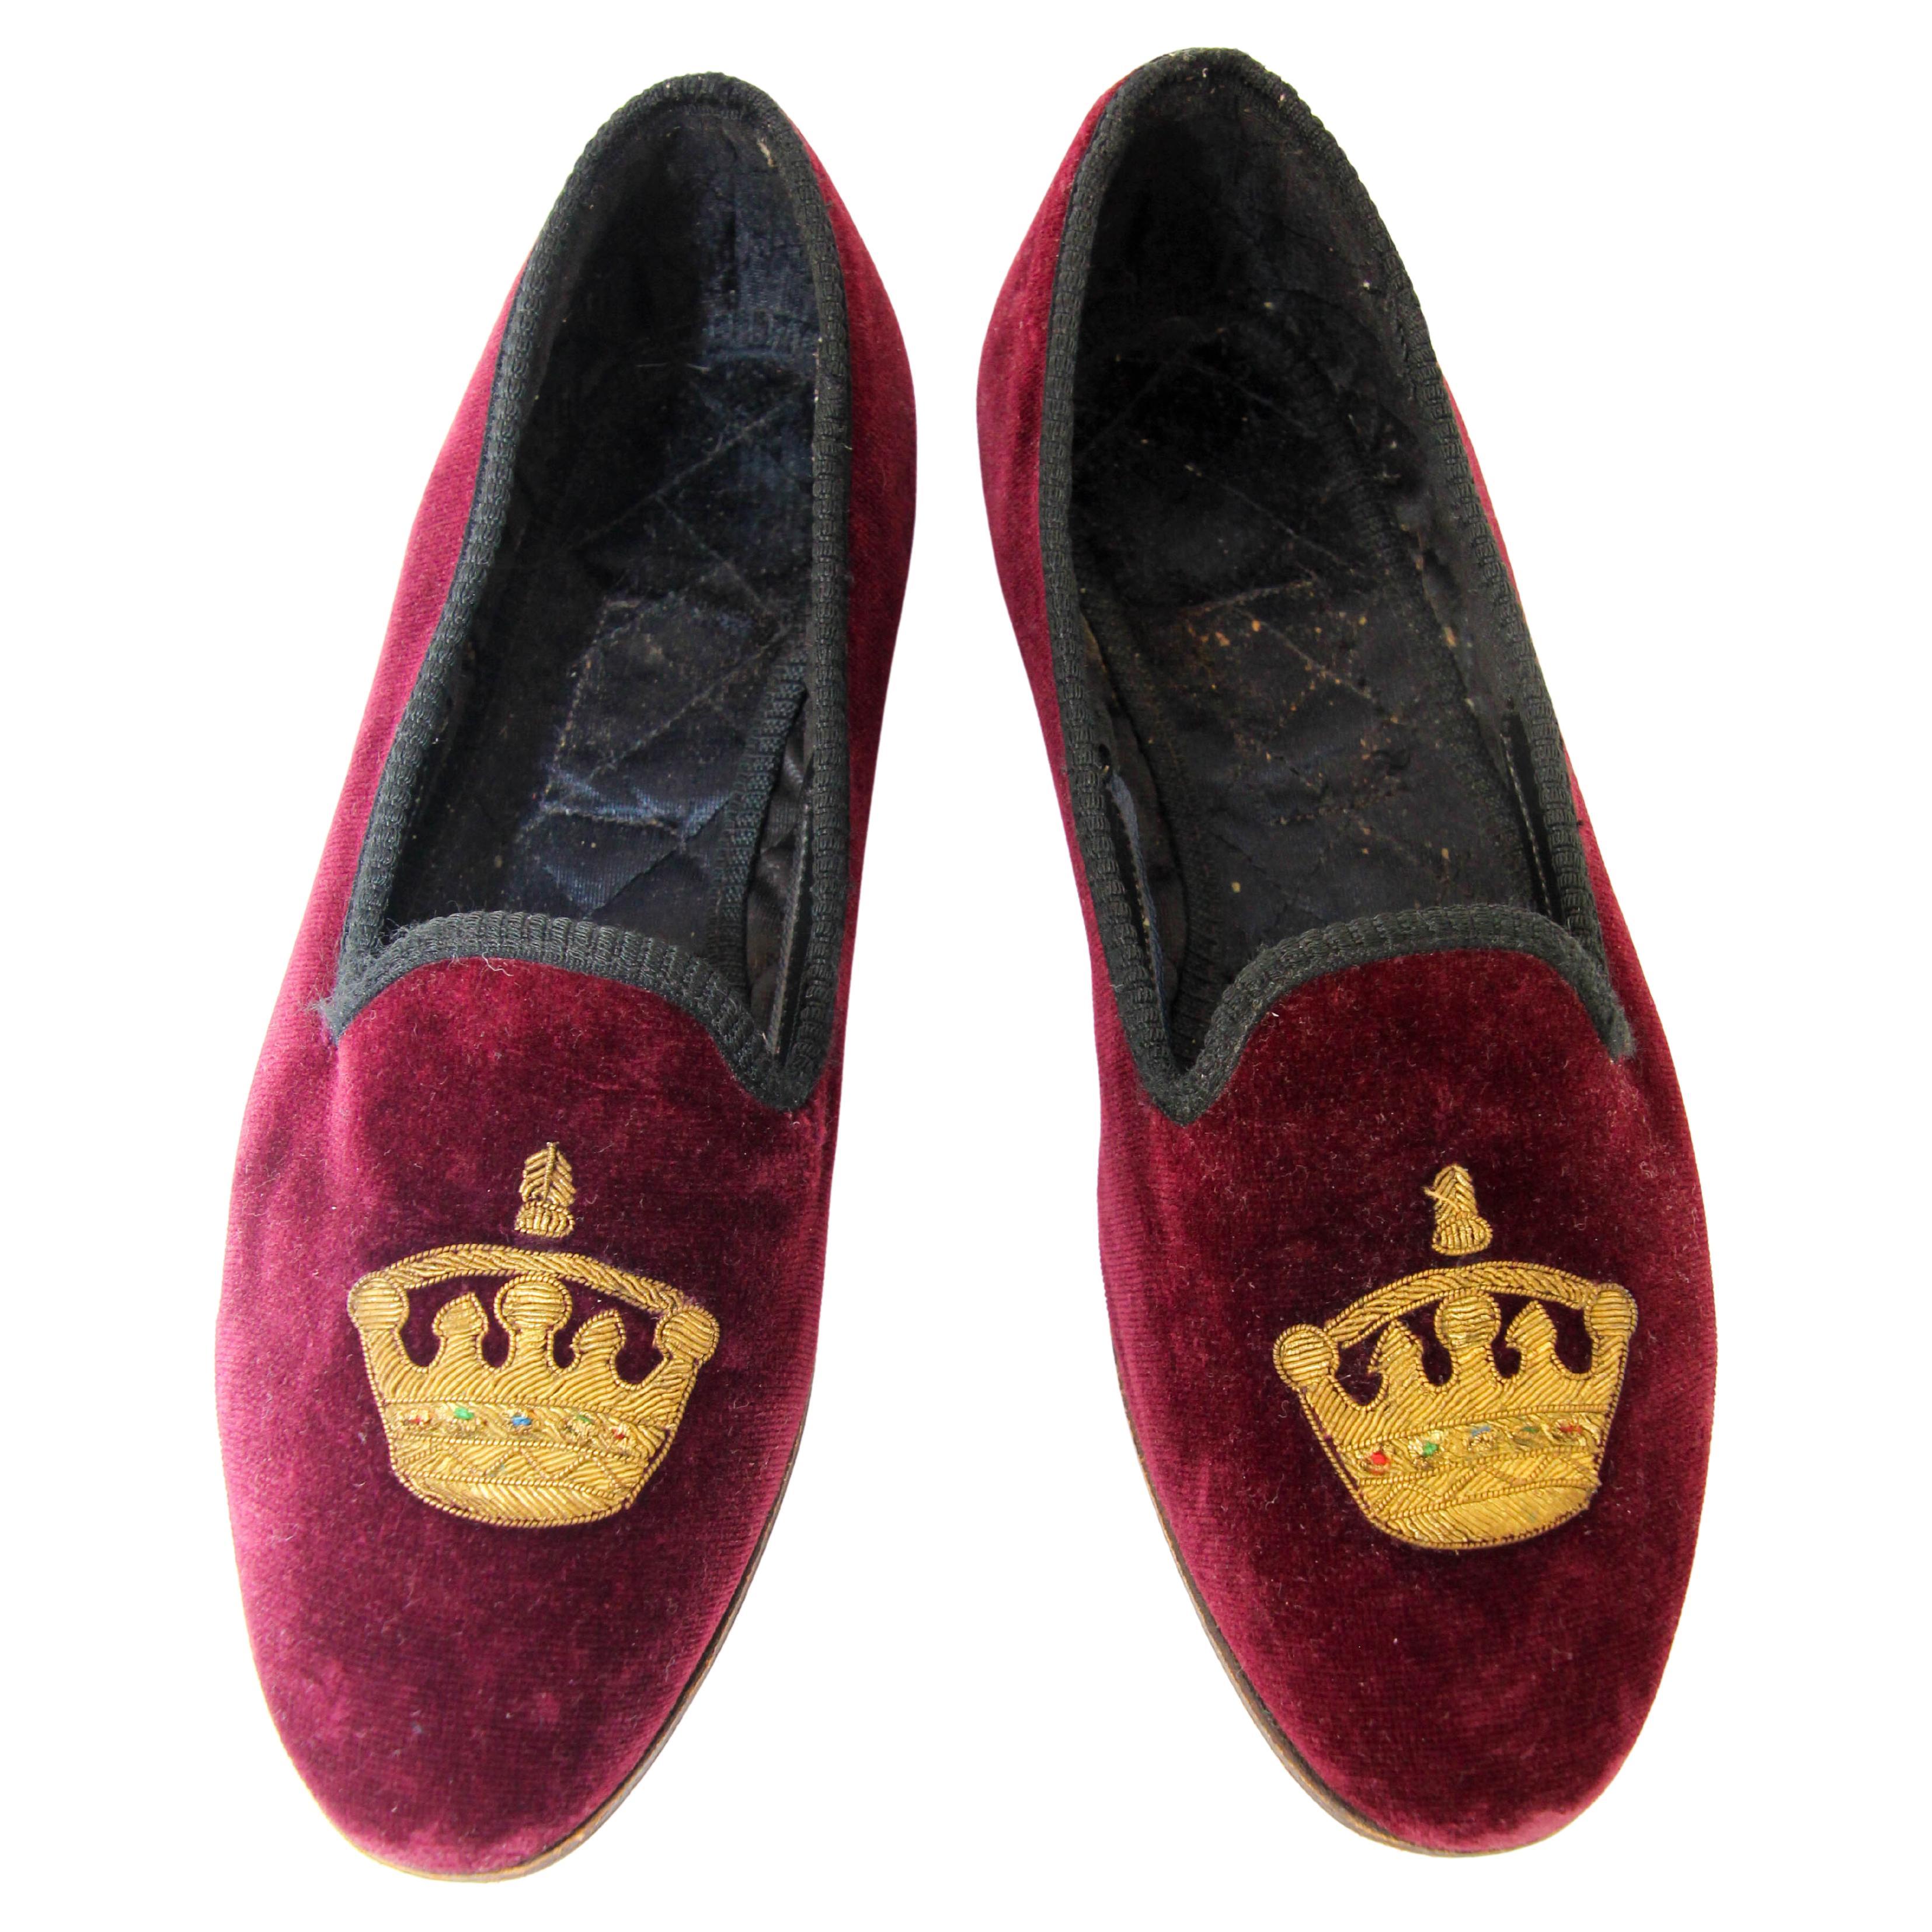 British Crown Embroidery Velvet Burgundy Loafers Slip On Size 6.5 For Sale